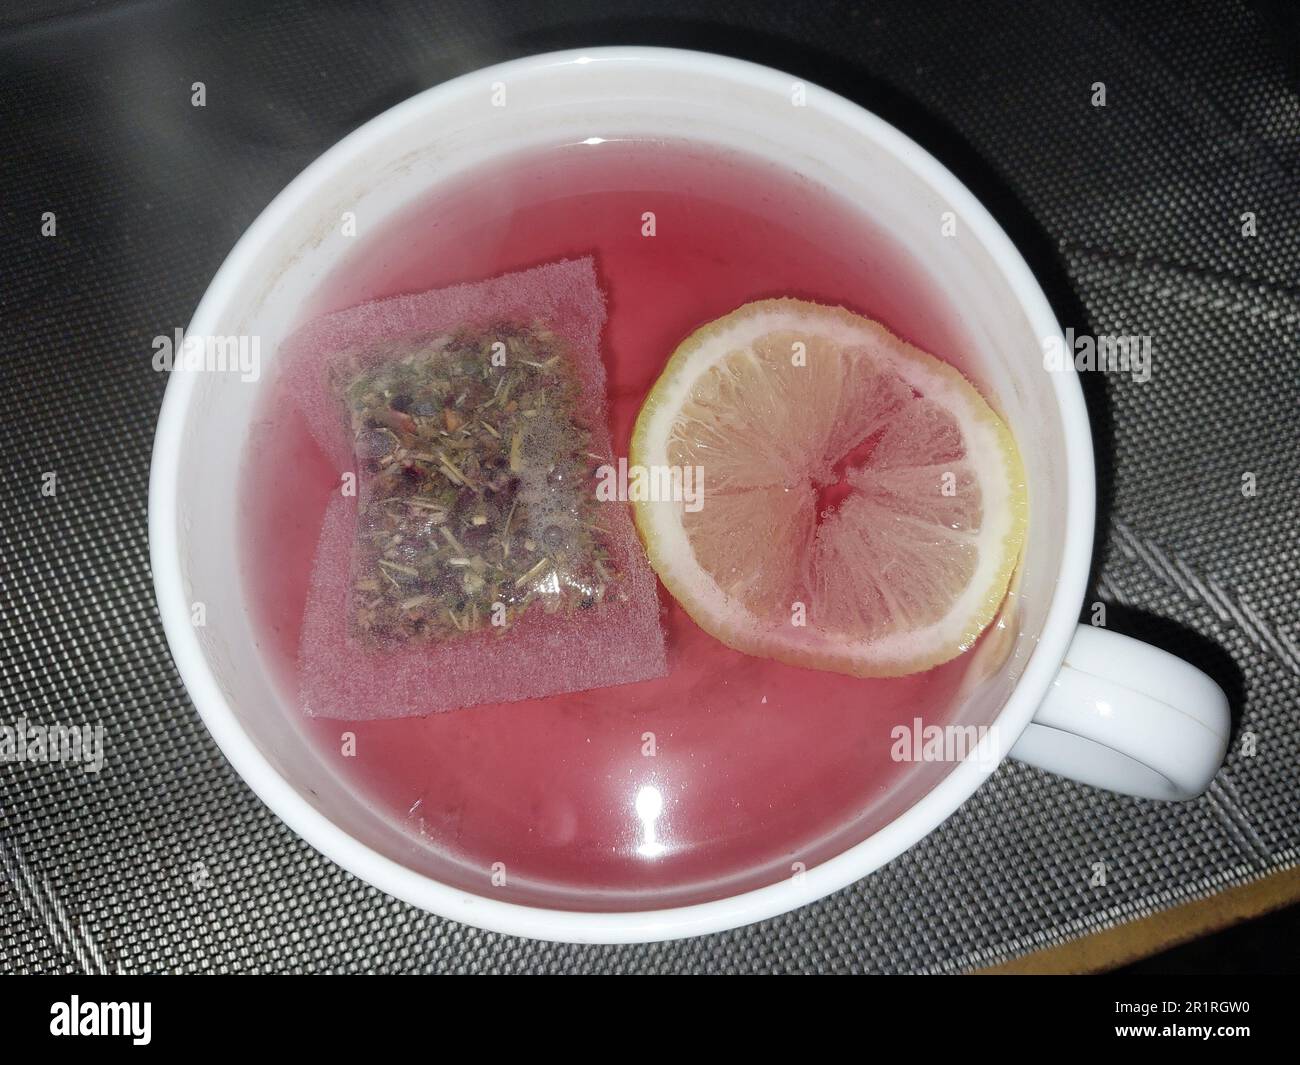 Tea with bag and lemon in a the cup. Stock Photo